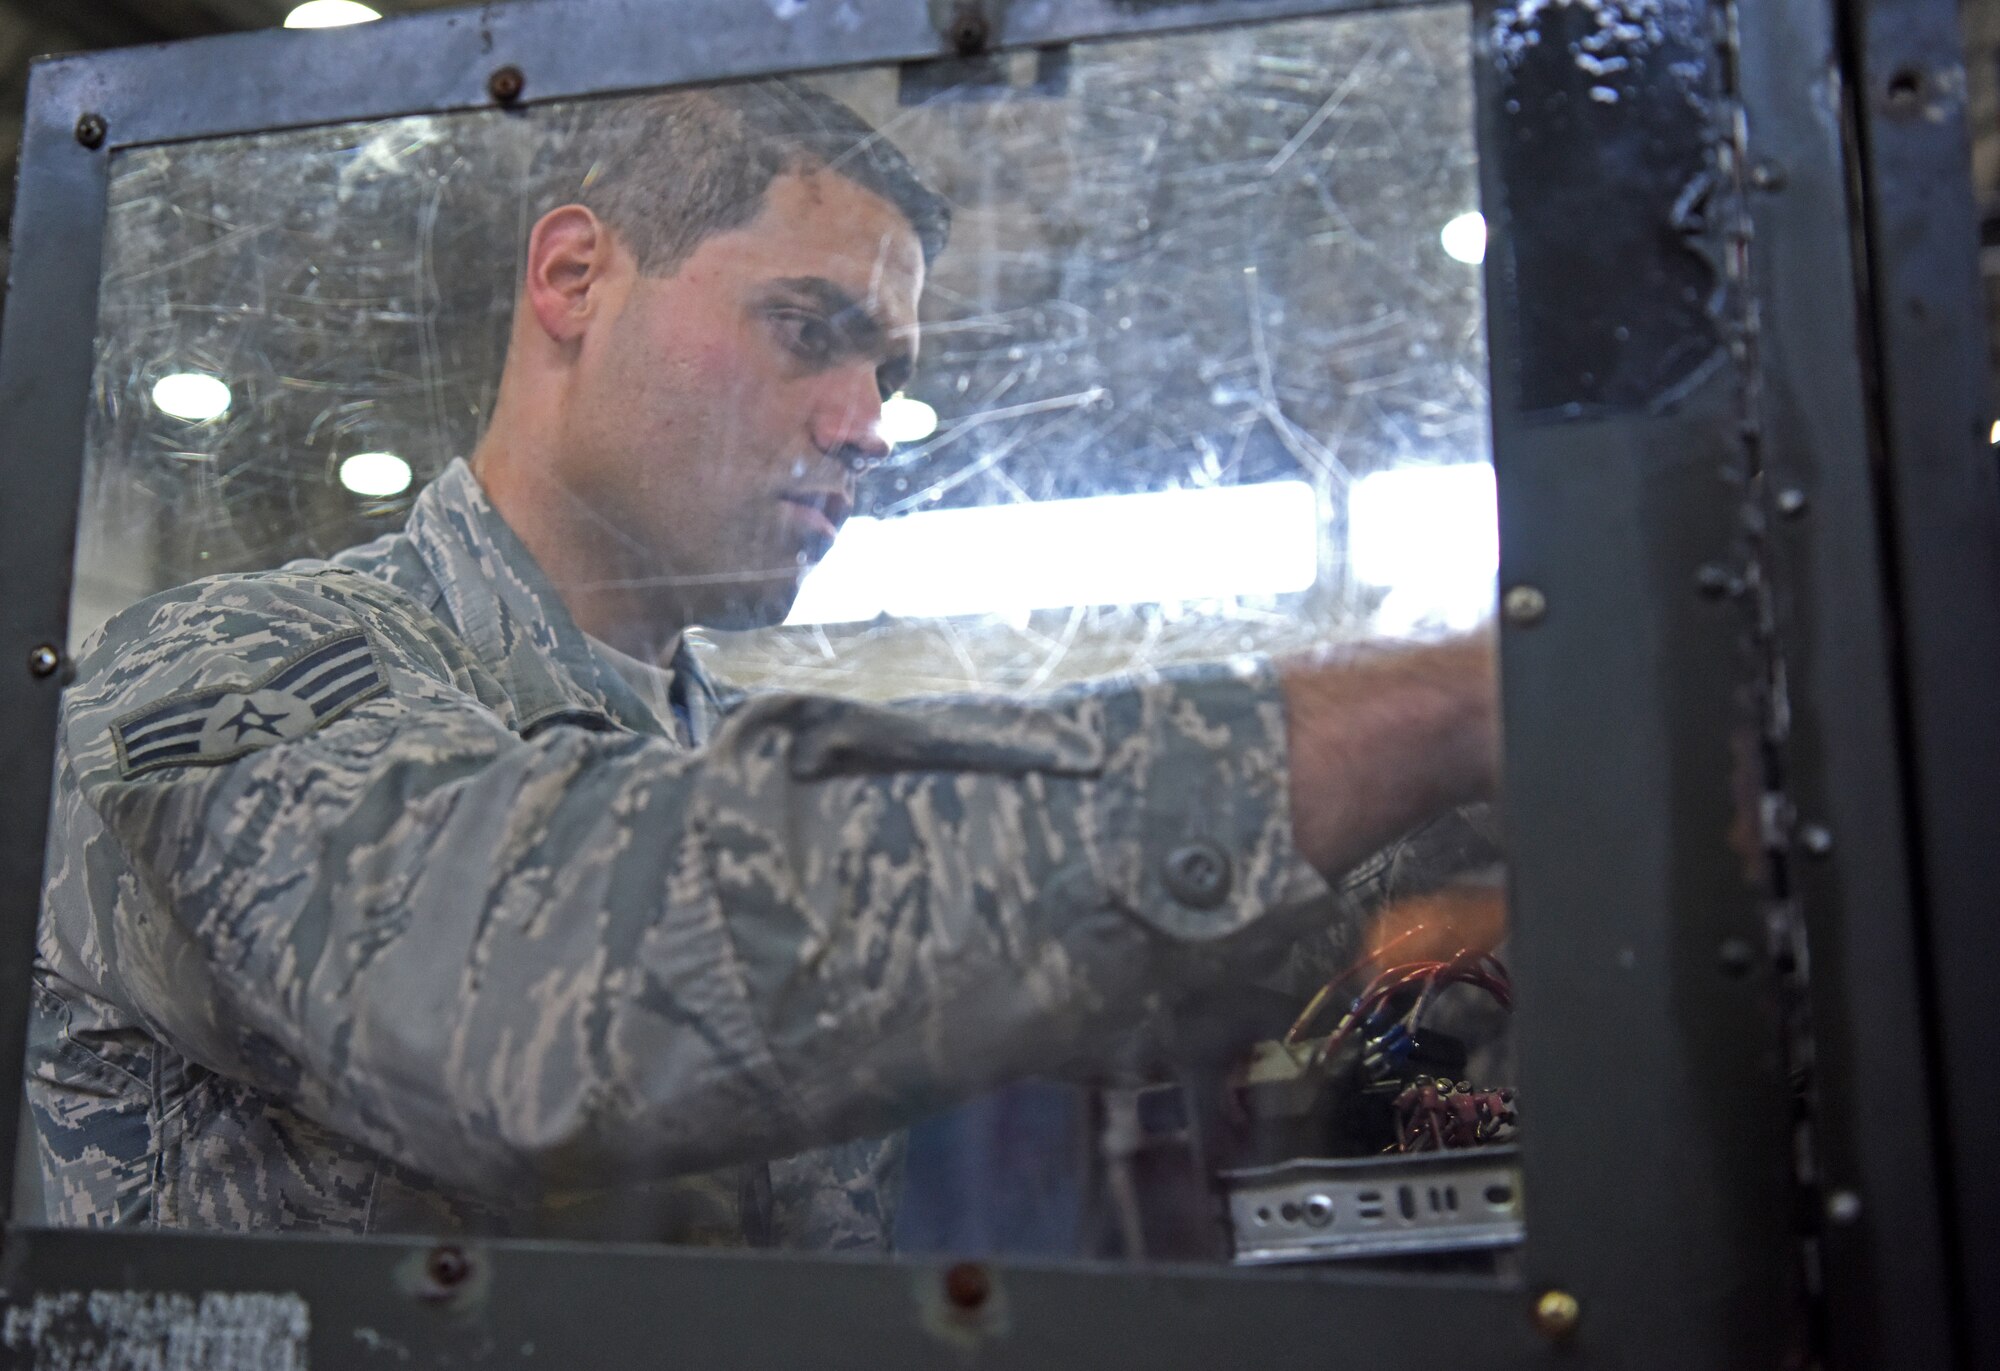 Senior Airman John Vega-Guzman, 100th Maintenance Squadron aerospace ground equipment technician, repairs wiring on a ground power unit at RAF Mildenhall, England, Oct. 23, 2019. The AGE shop inspects hundreds of pieces of equipment which are essential to ensuring an aircraft’s mission readiness. (U.S. Air Force photo by Senior Airman Brandon Esau)